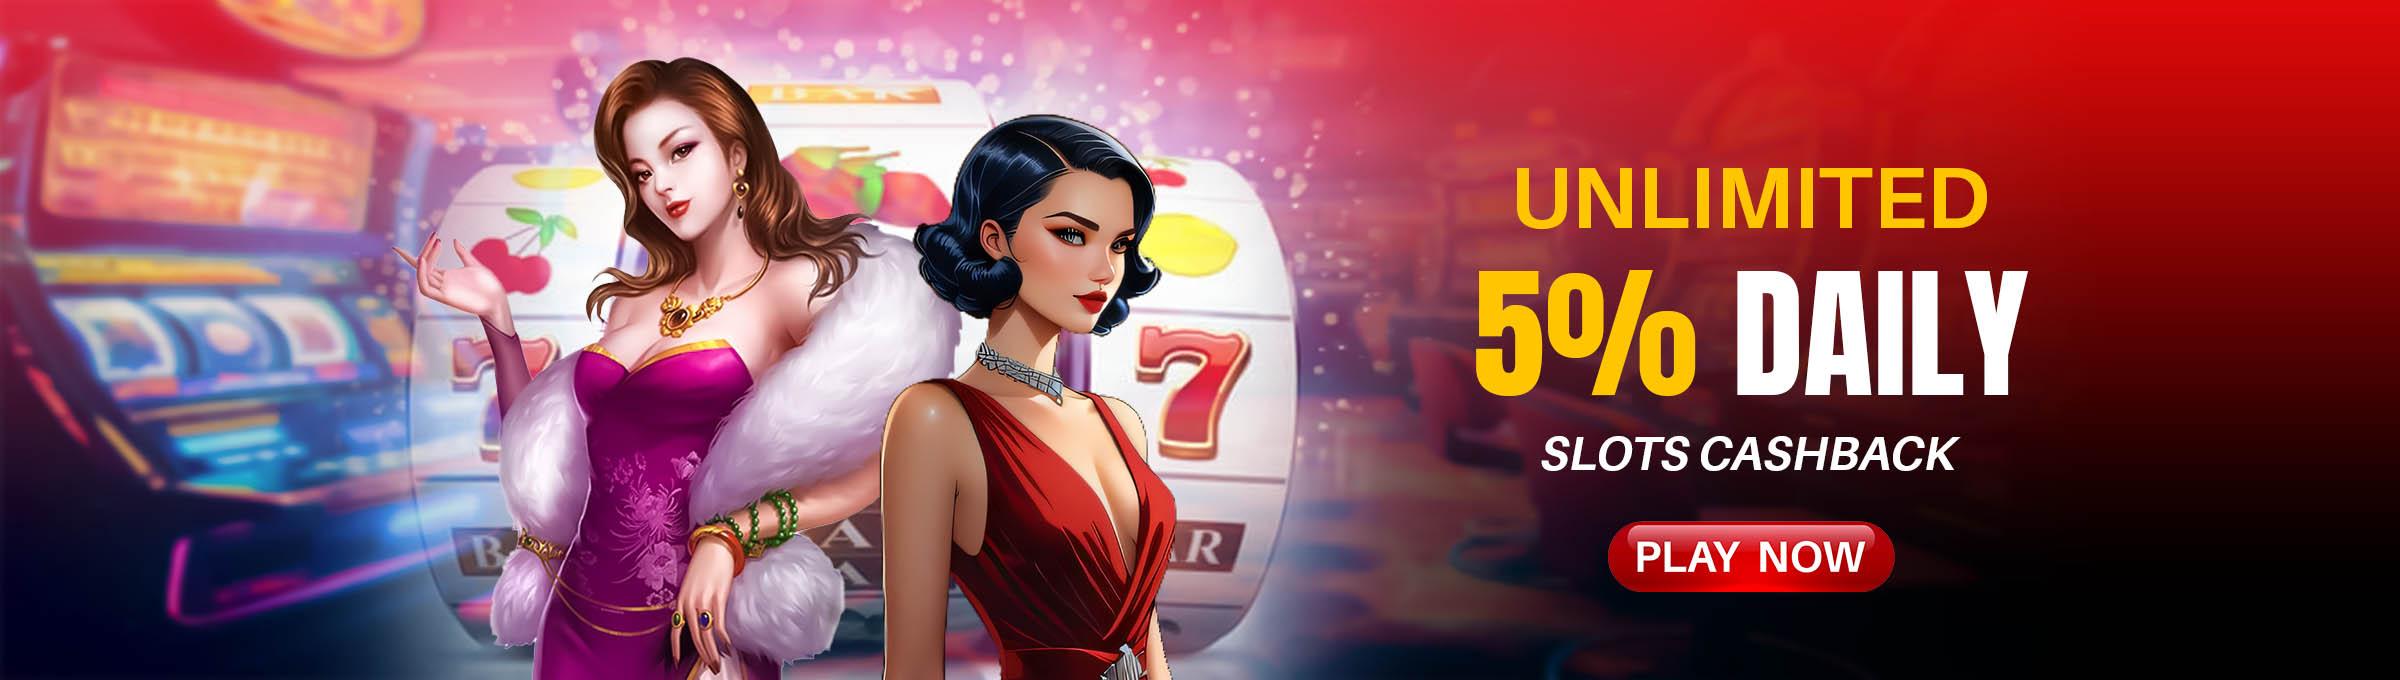 UNLIMITED 5% Daily Slots Cashback